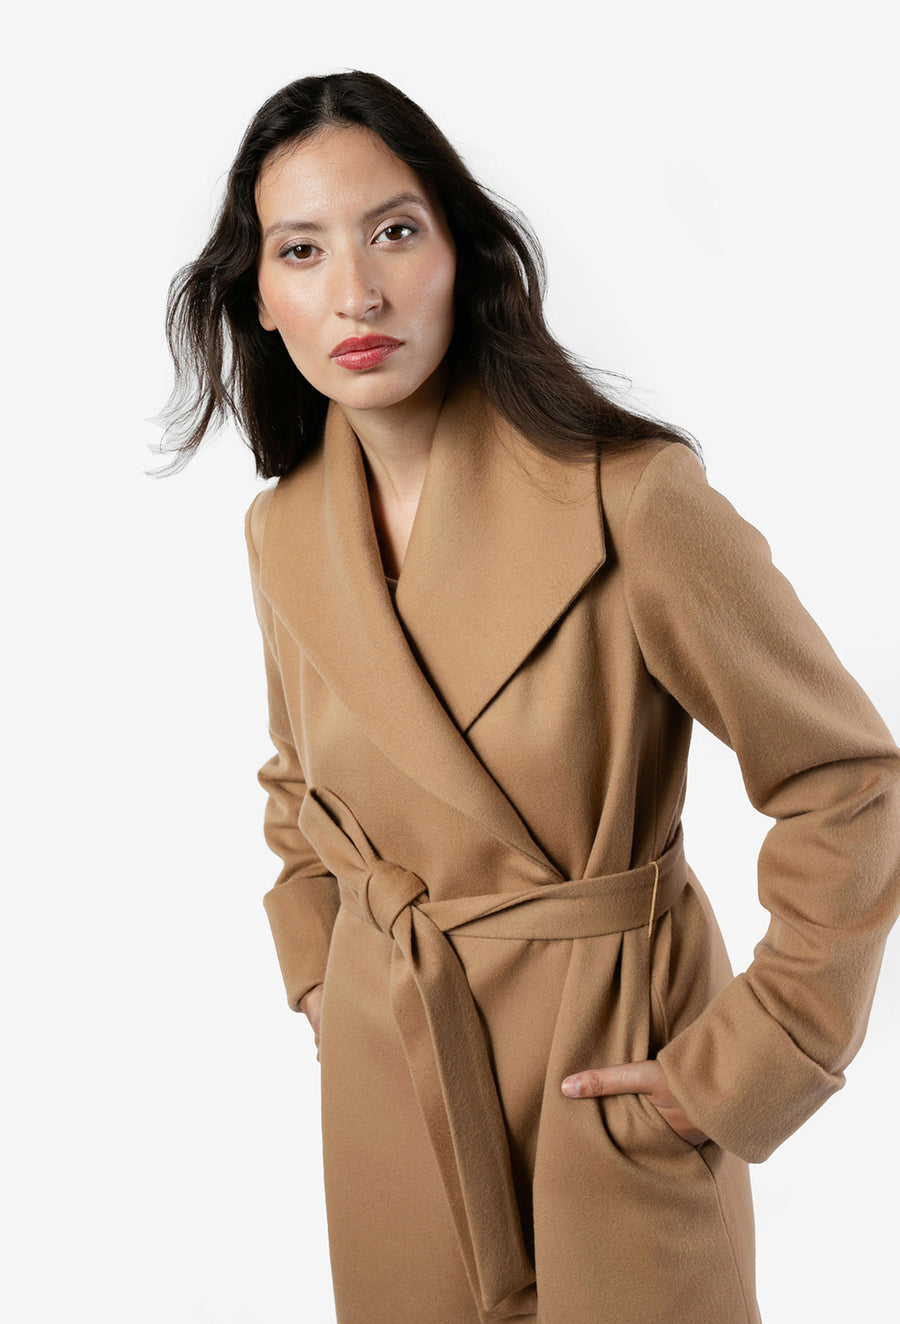 The Southport Wool Overcoat - Camel